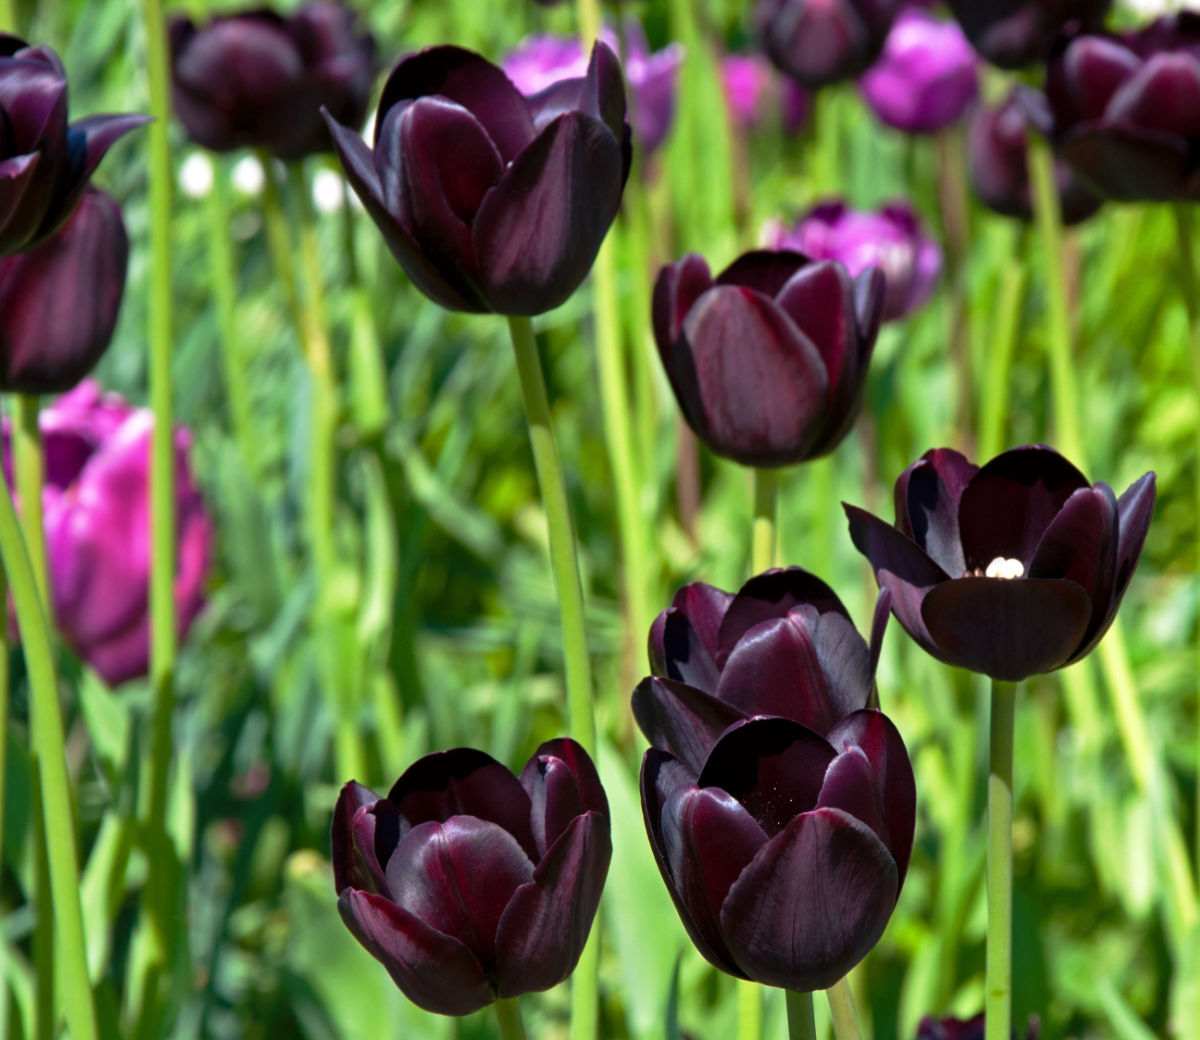 Almost black flowers of queen of the night tulip.